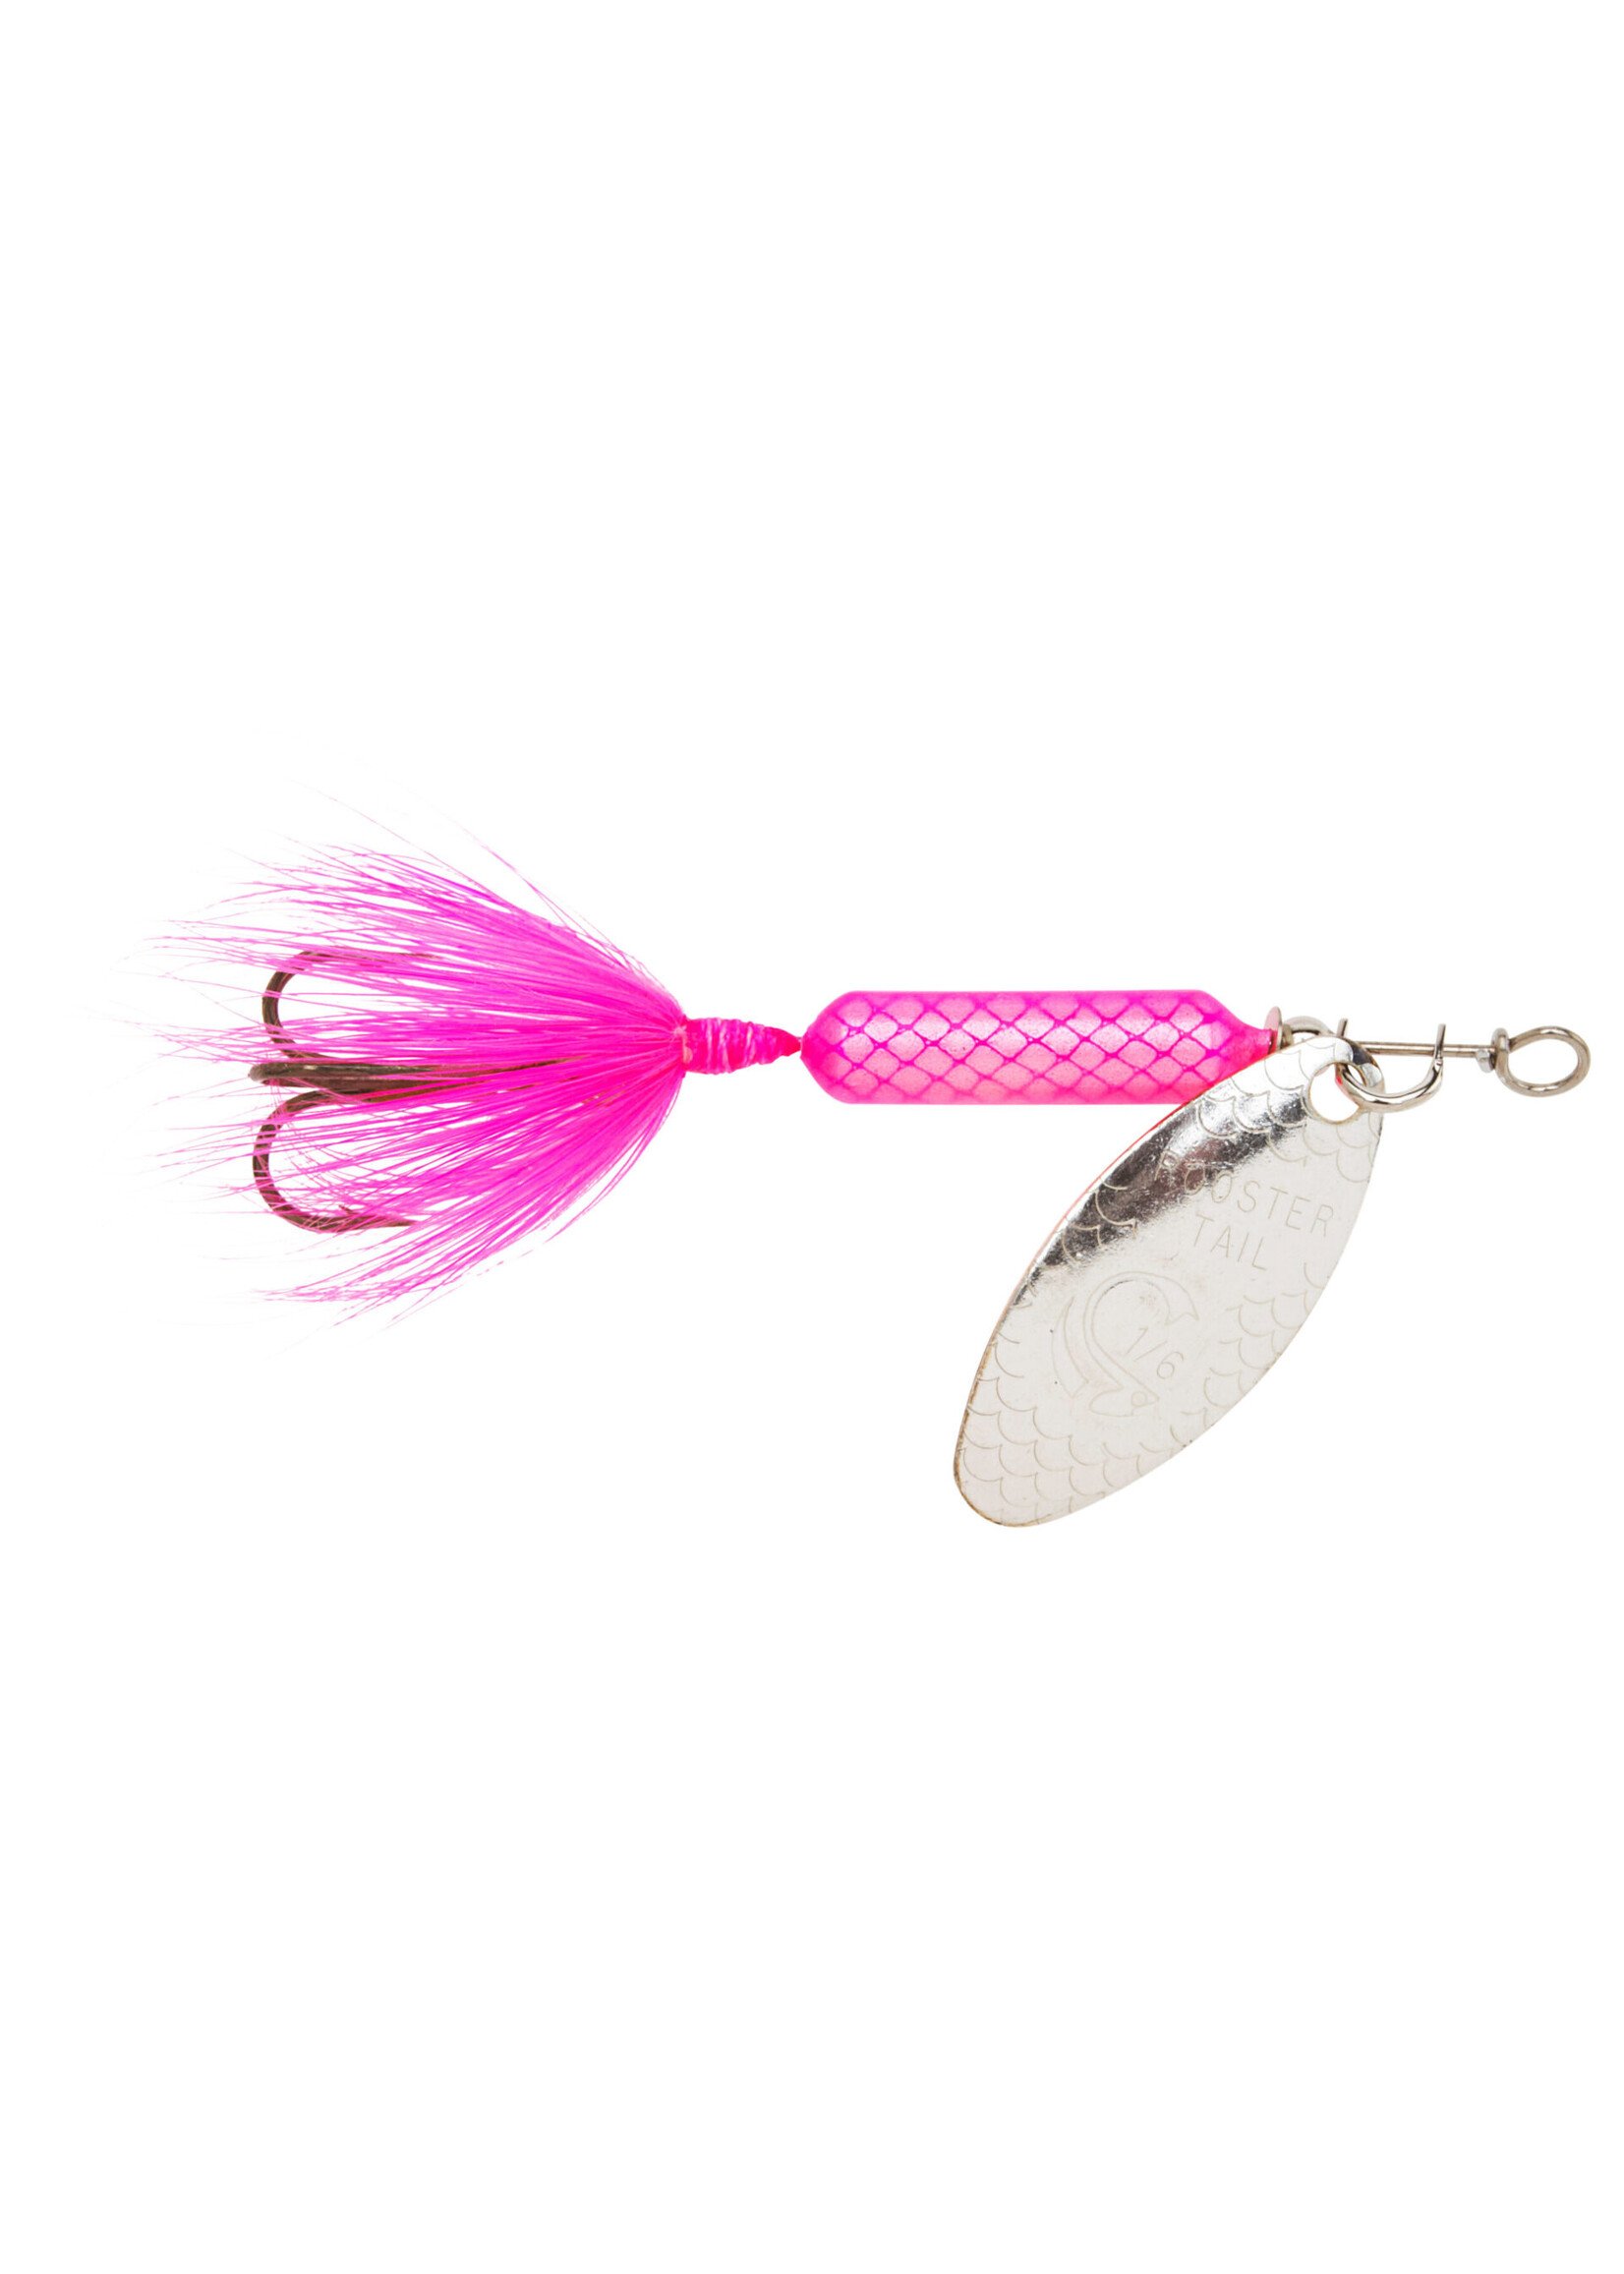 Rooster Tail, Inline Spinnerbait Fishing Lure, 1/16 oz, Brown